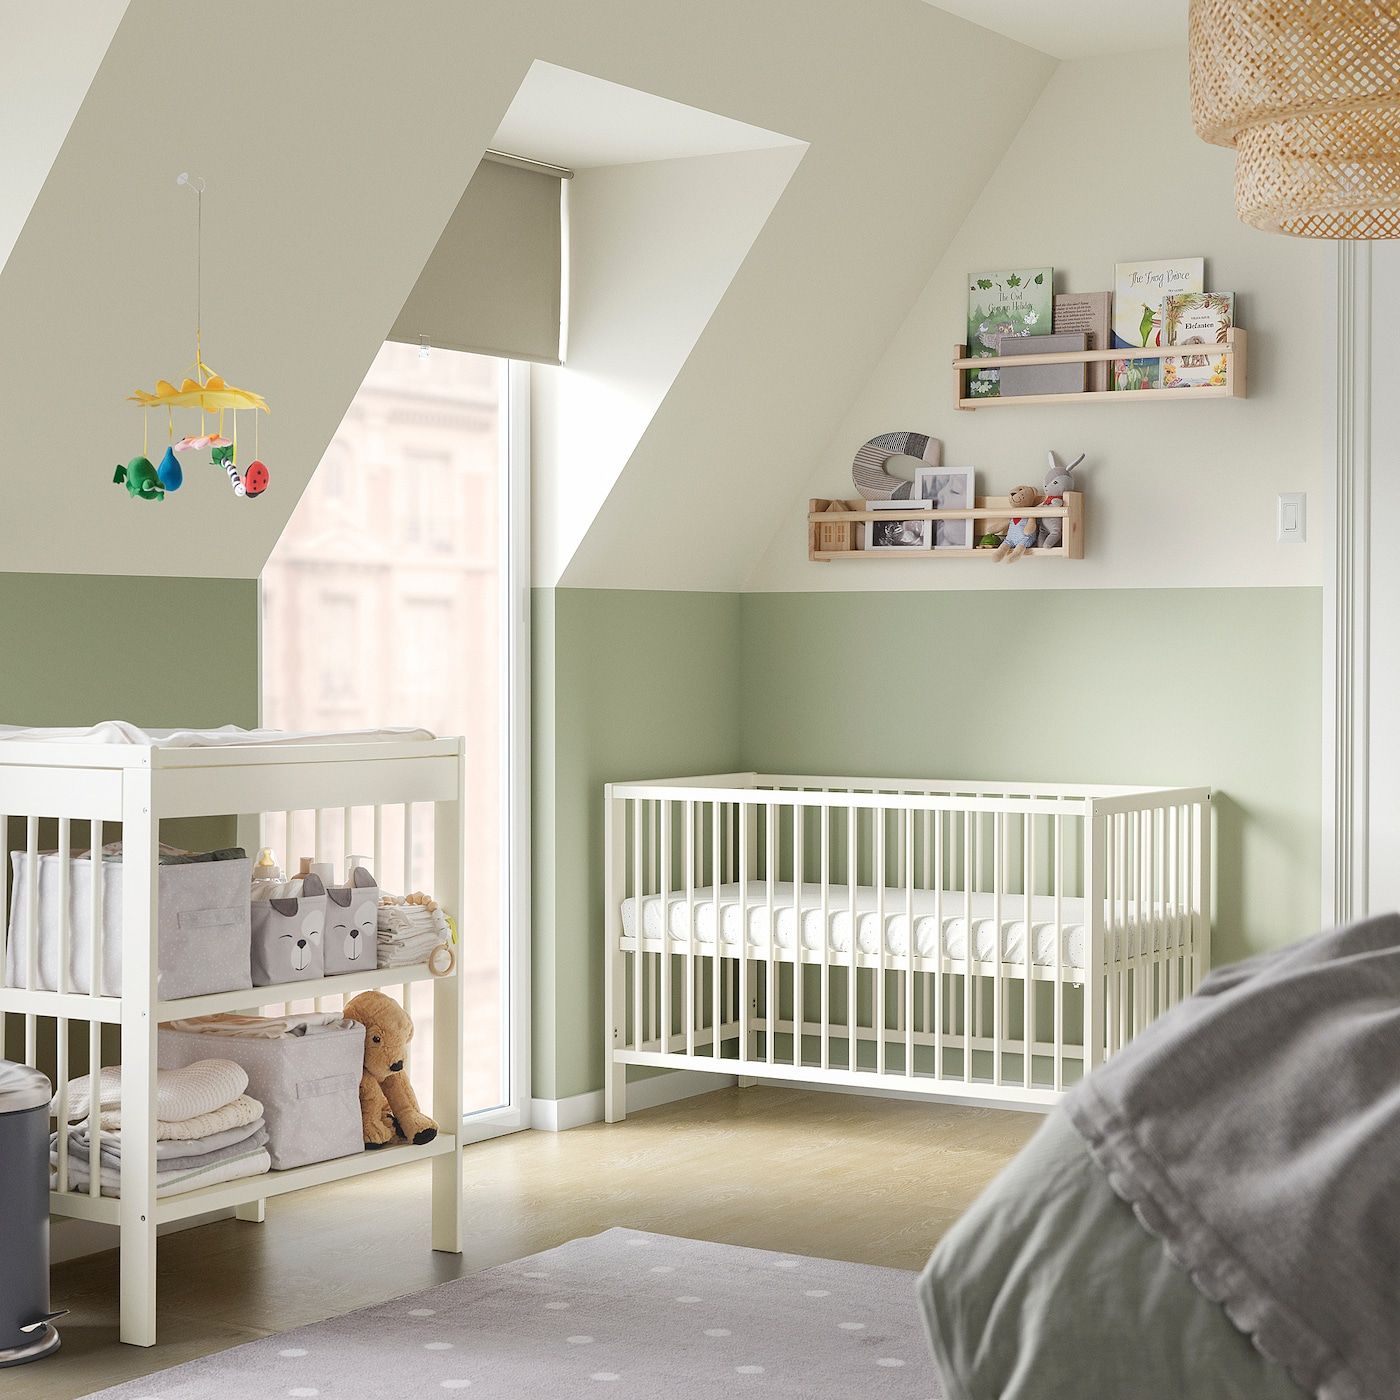 The Complete Collection of Nursery Furniture for Your Baby